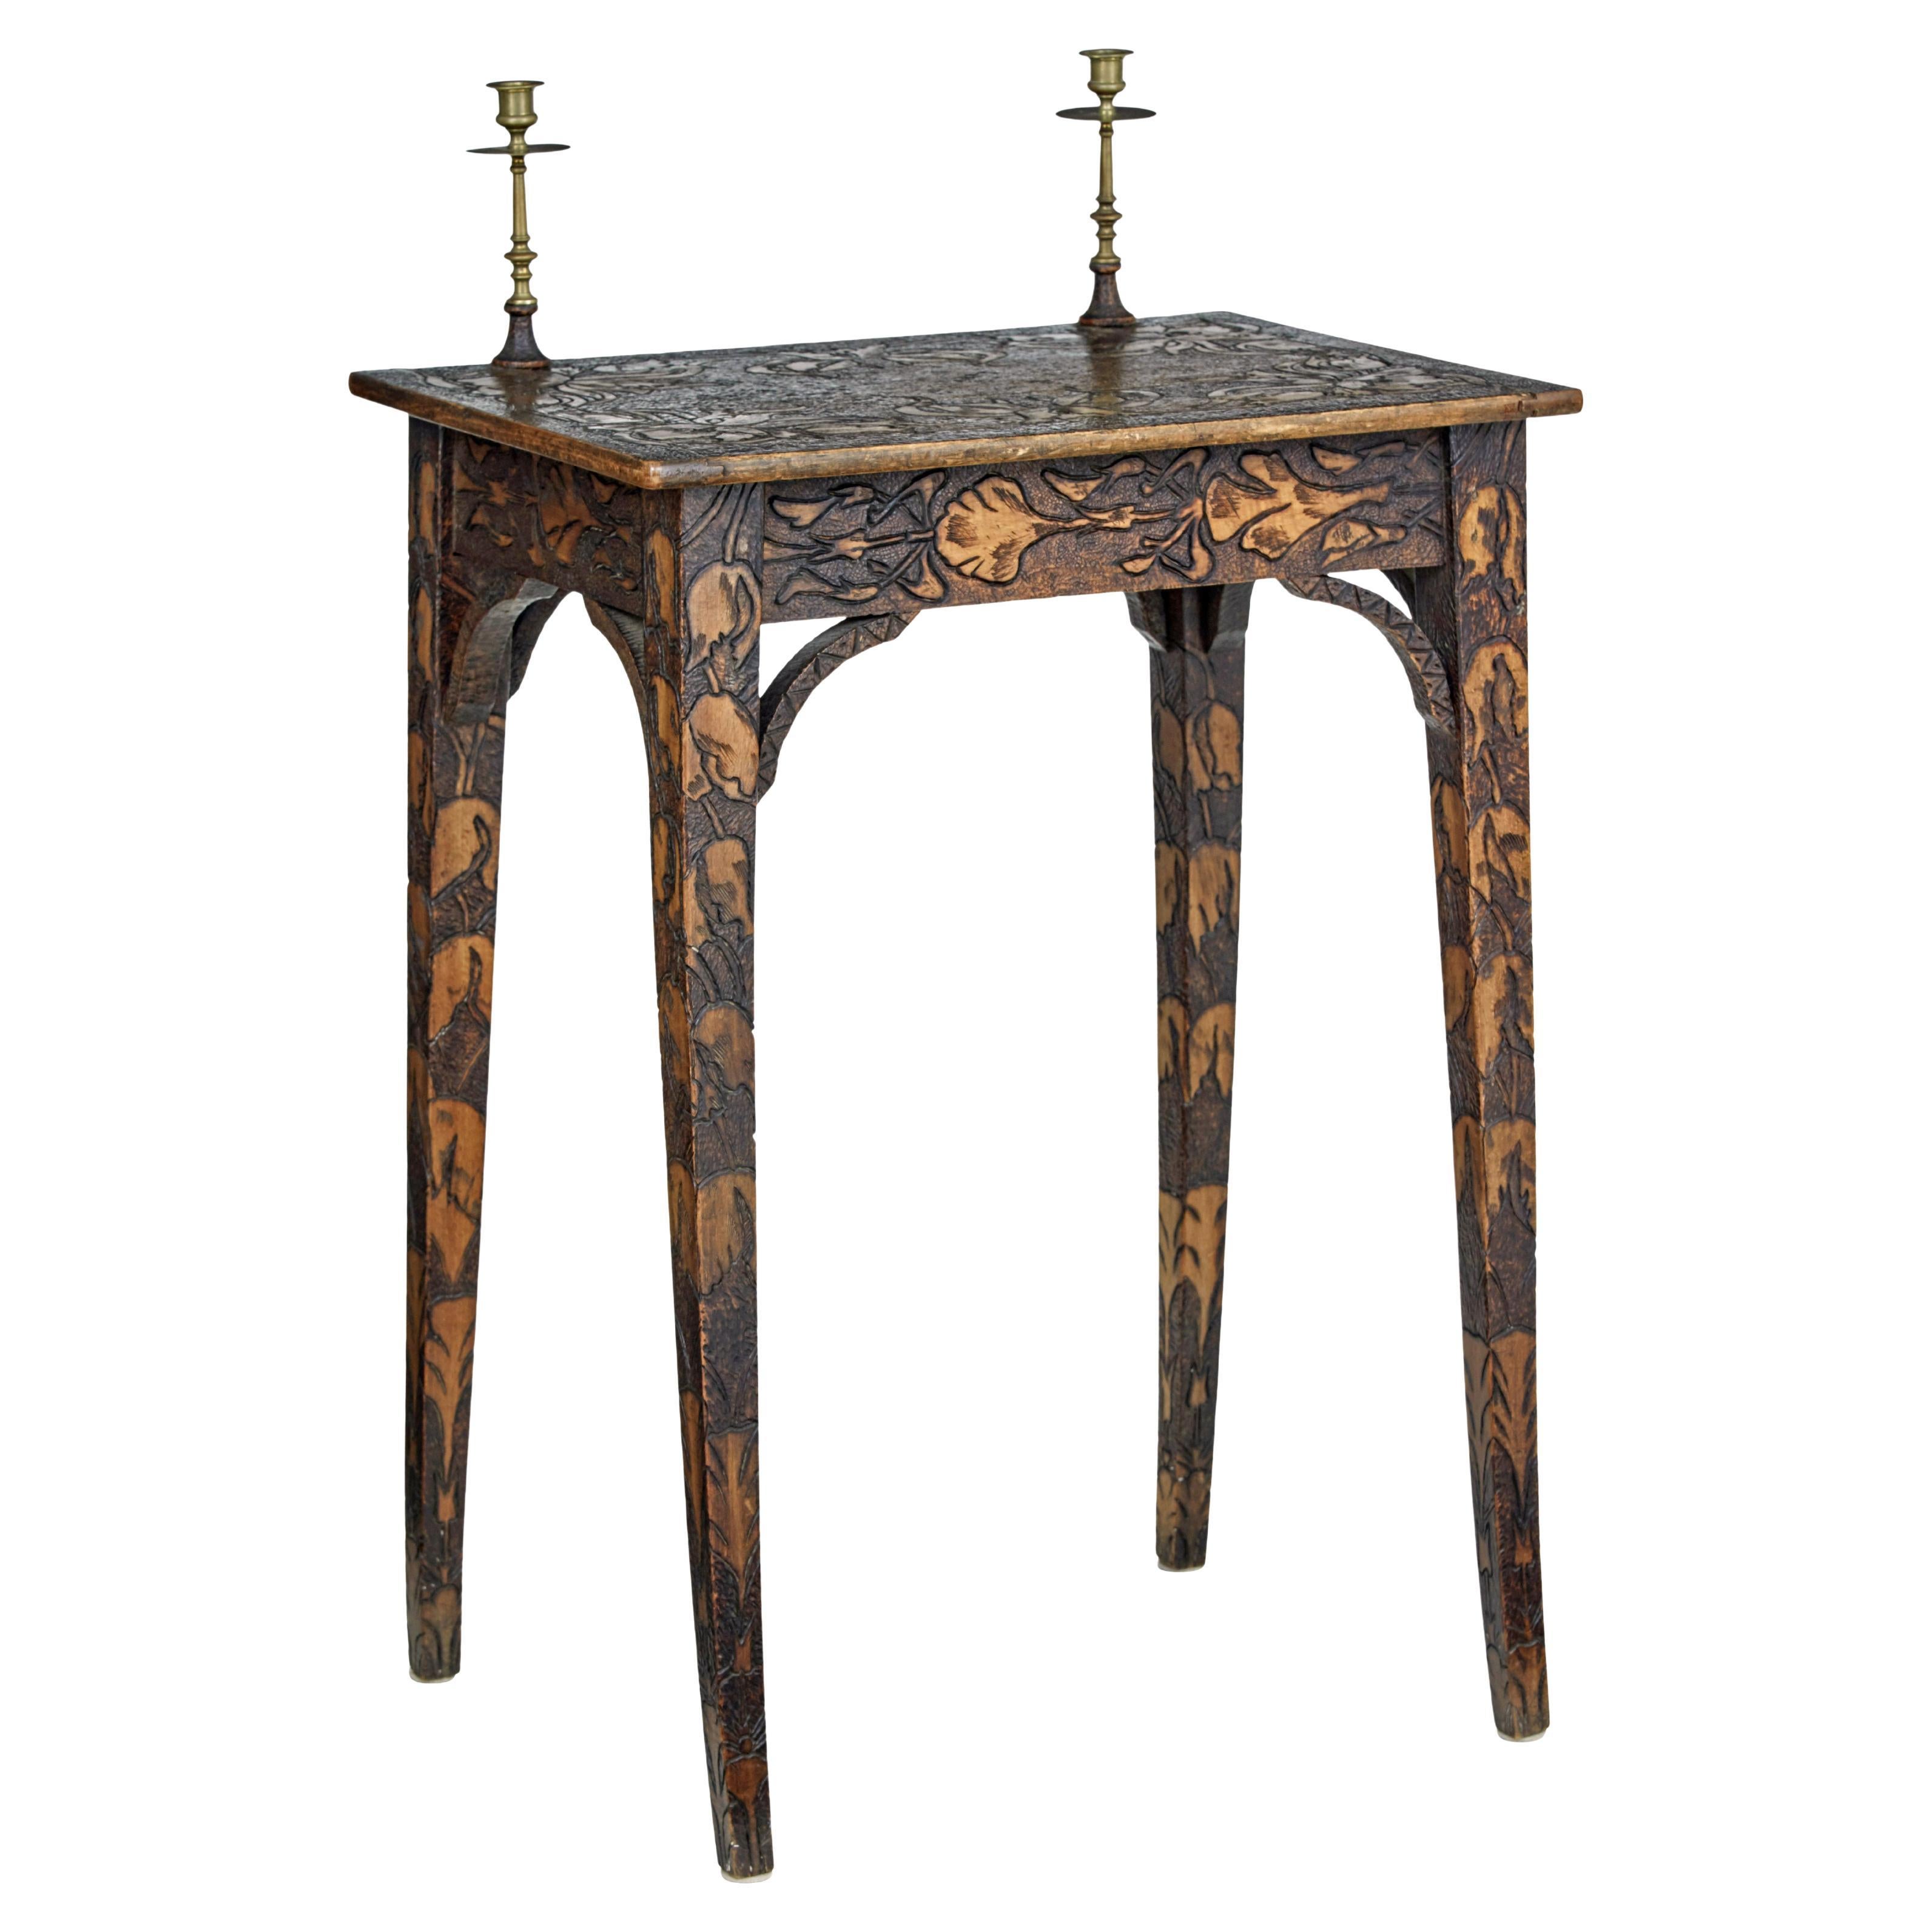 Early 20th century French carved poker work writing table